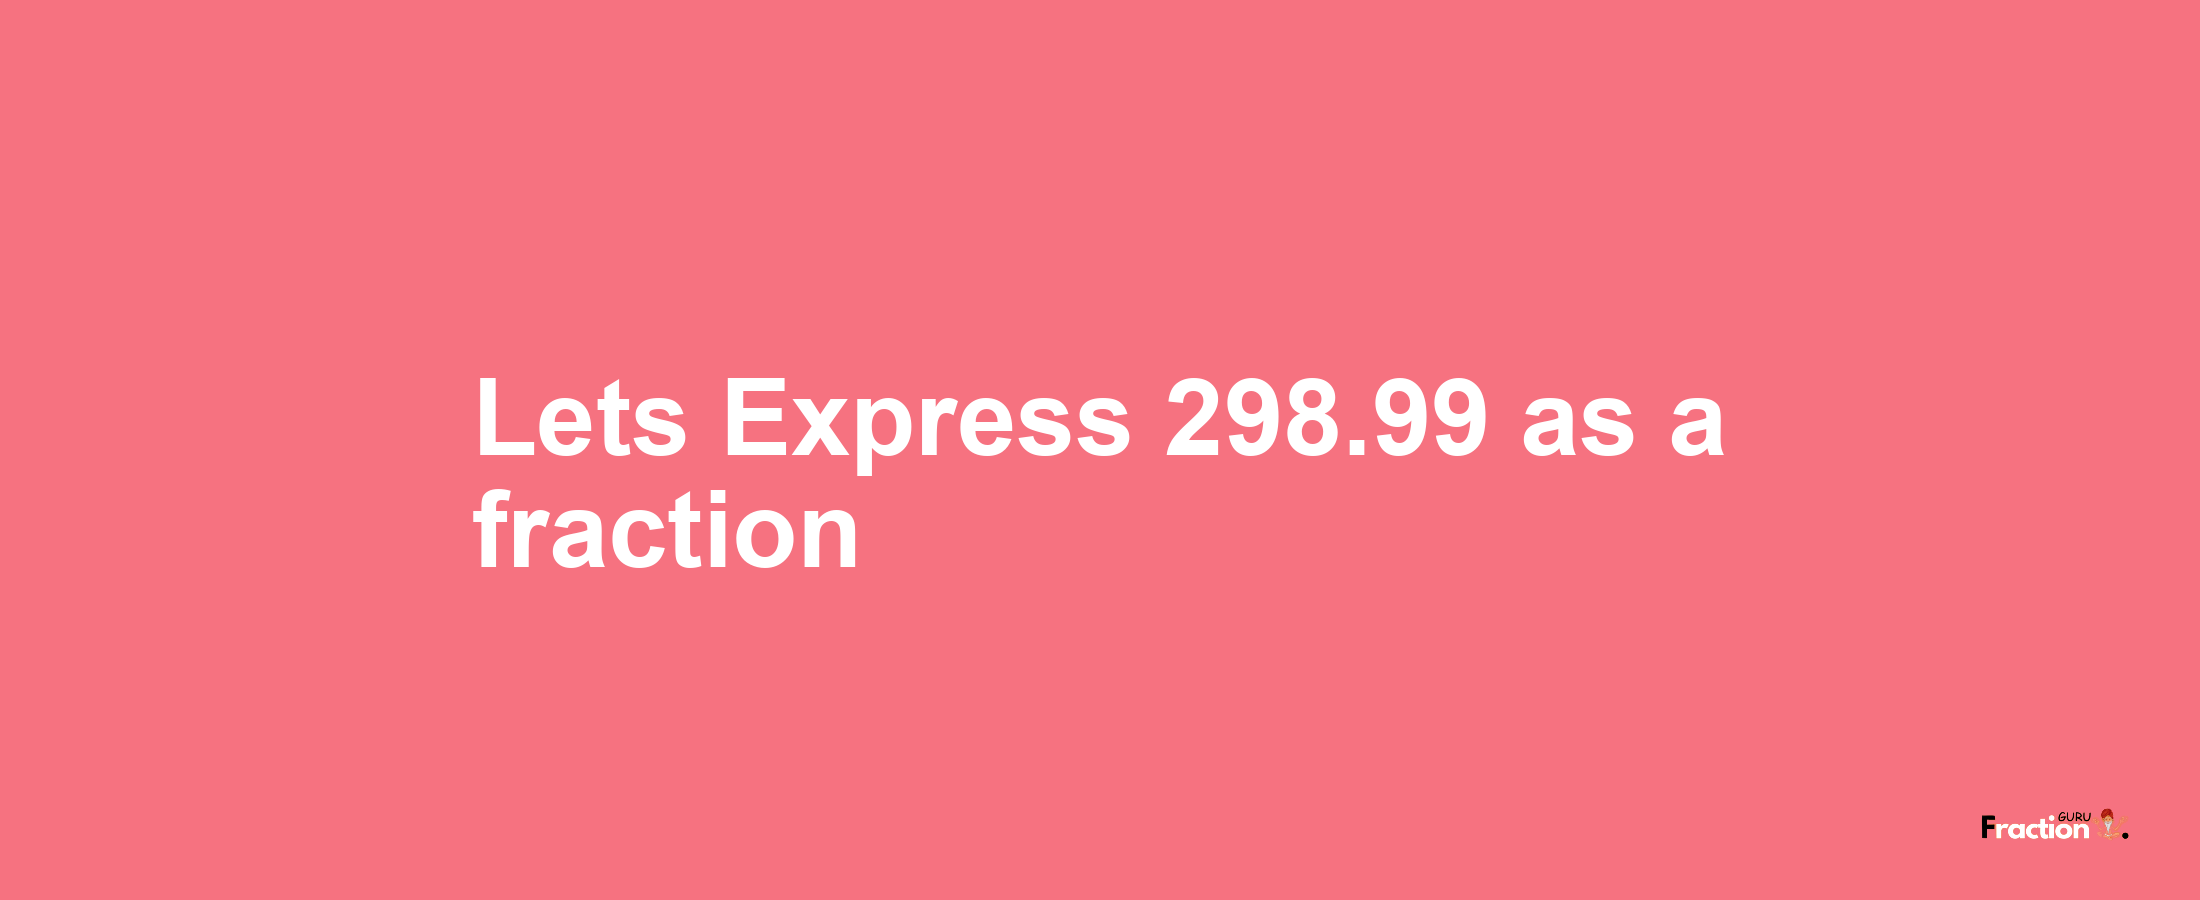 Lets Express 298.99 as afraction